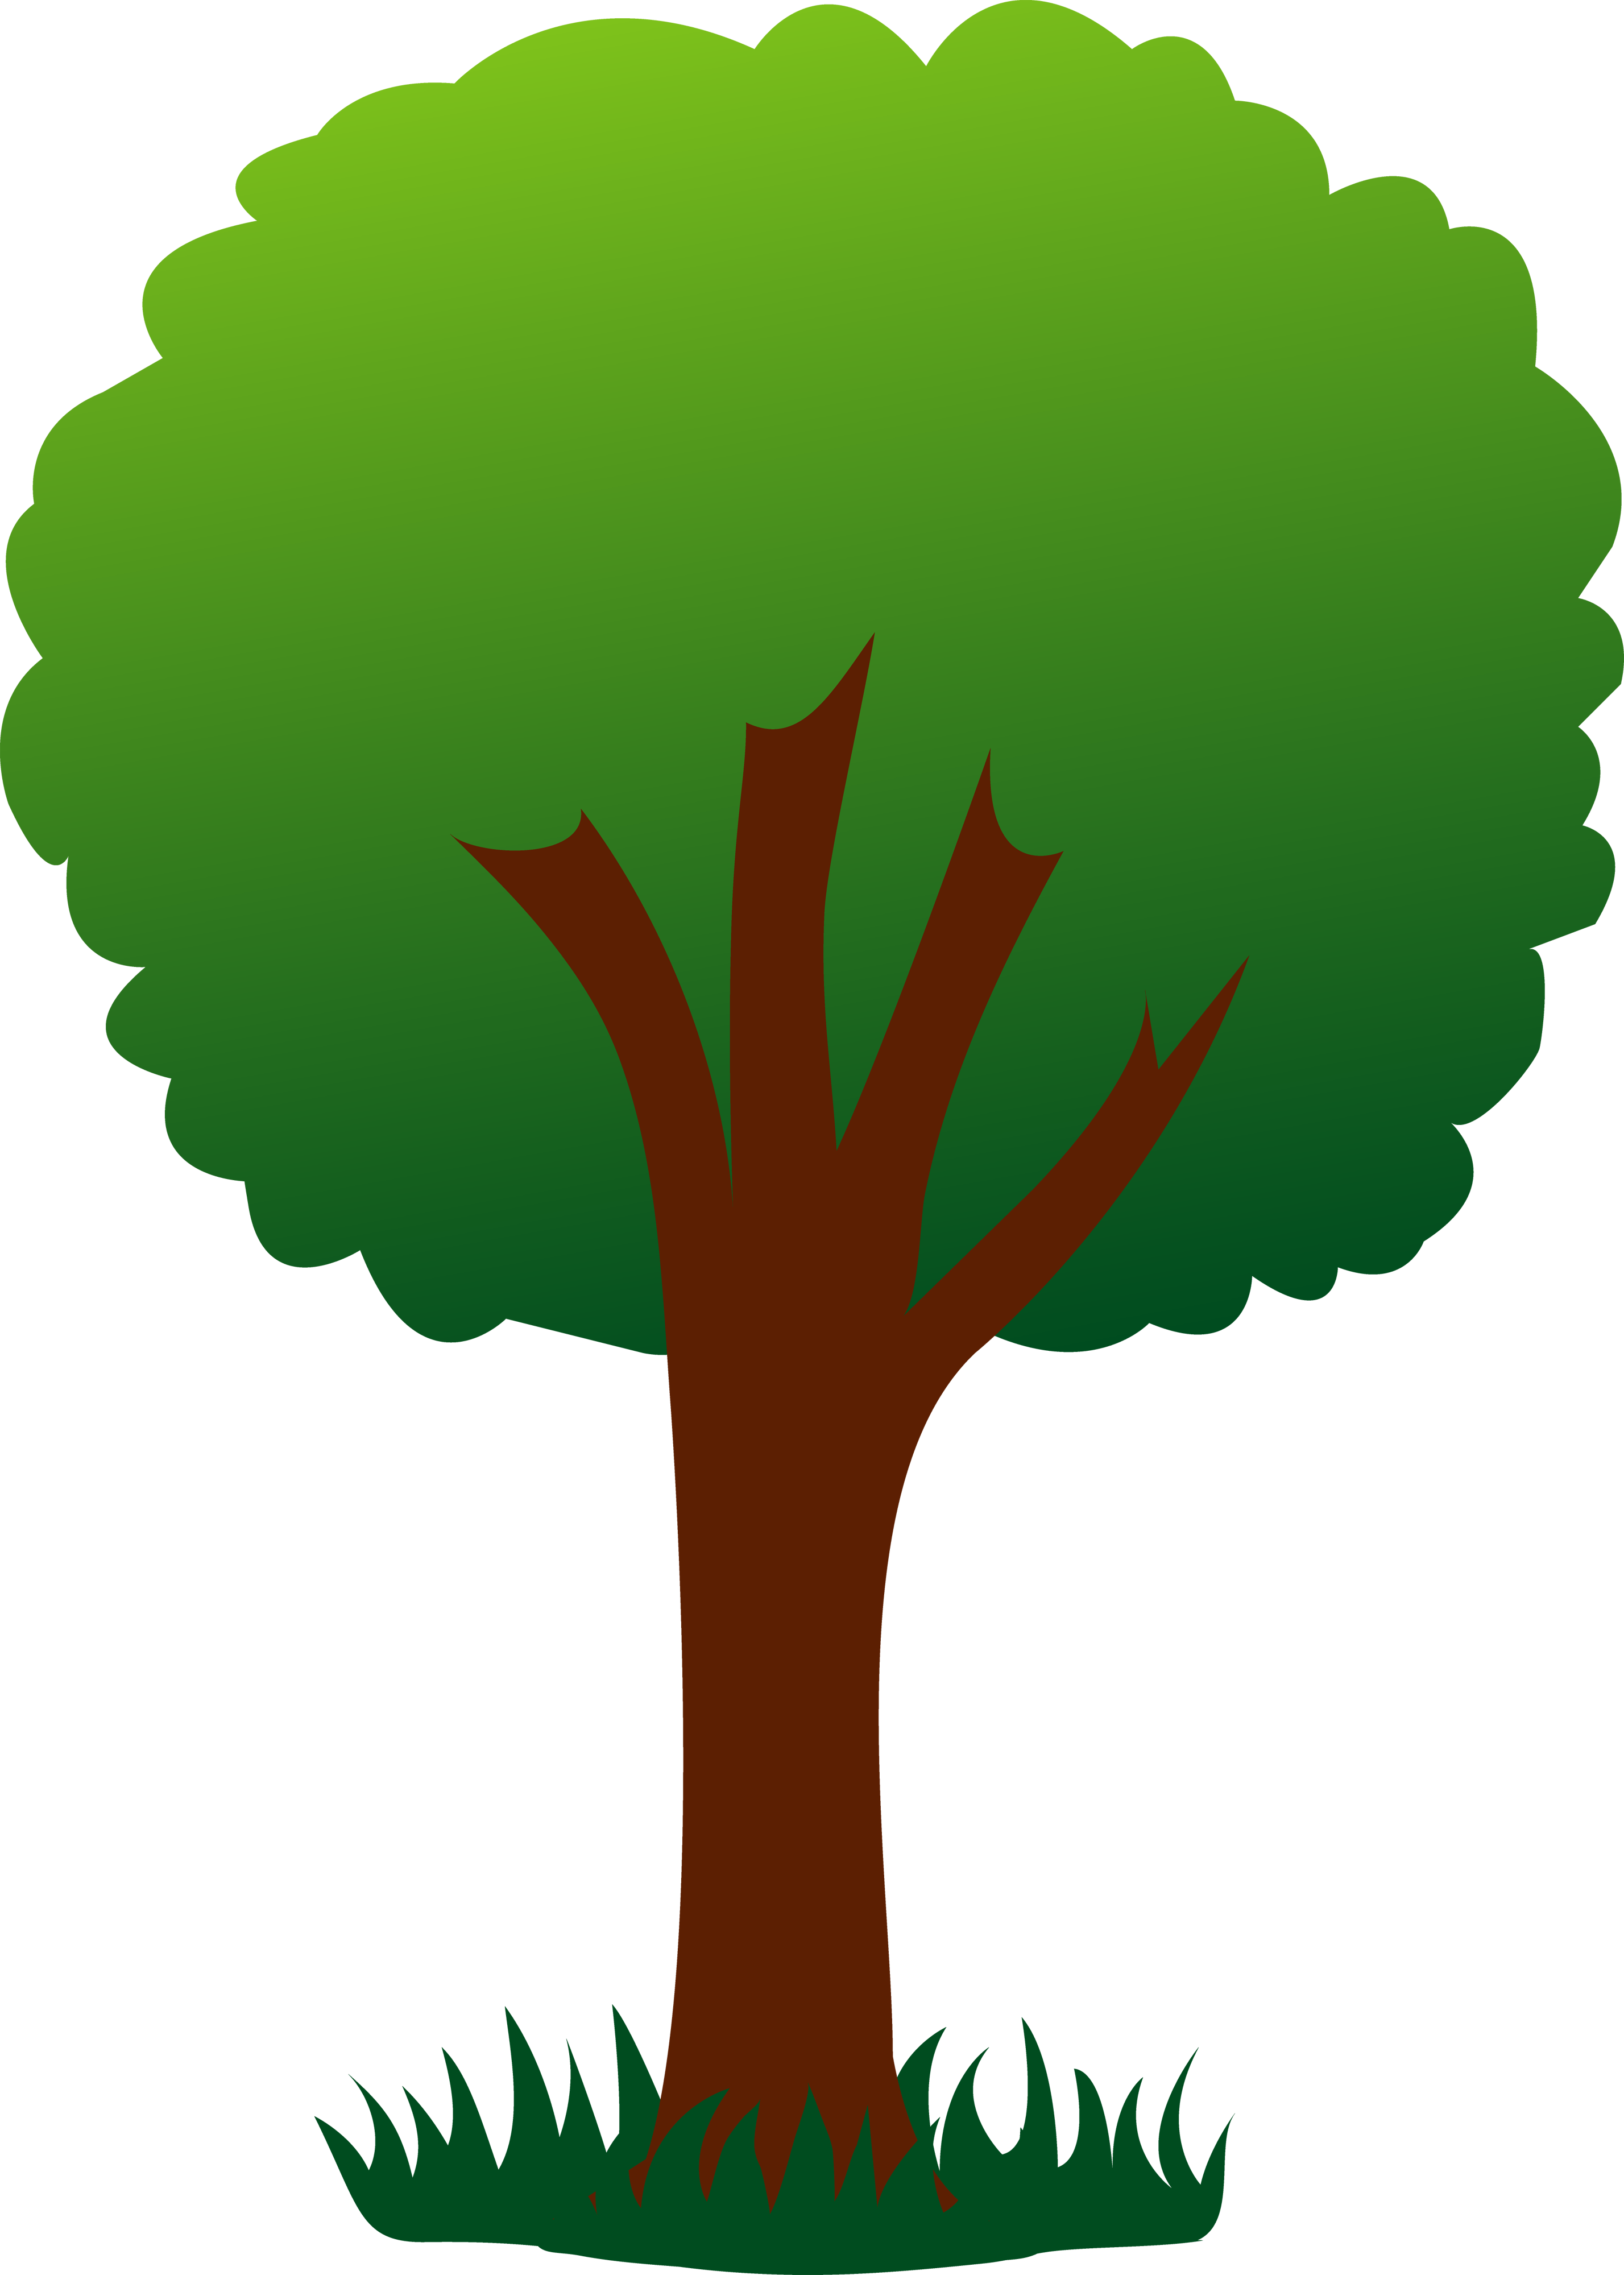 Tree drawing clipart